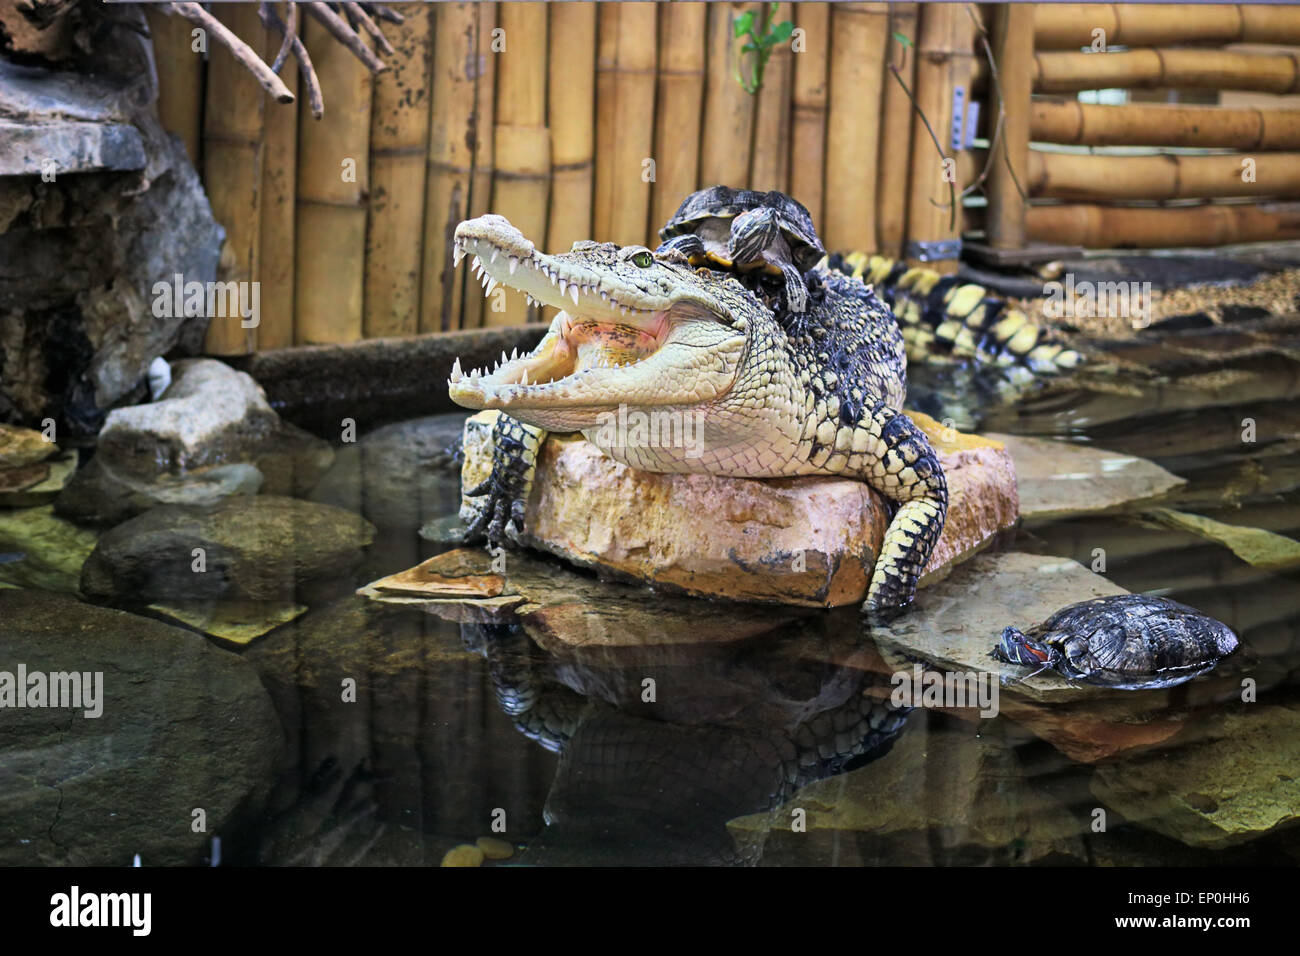 Crocodile resting on stone with turtles Stock Photo